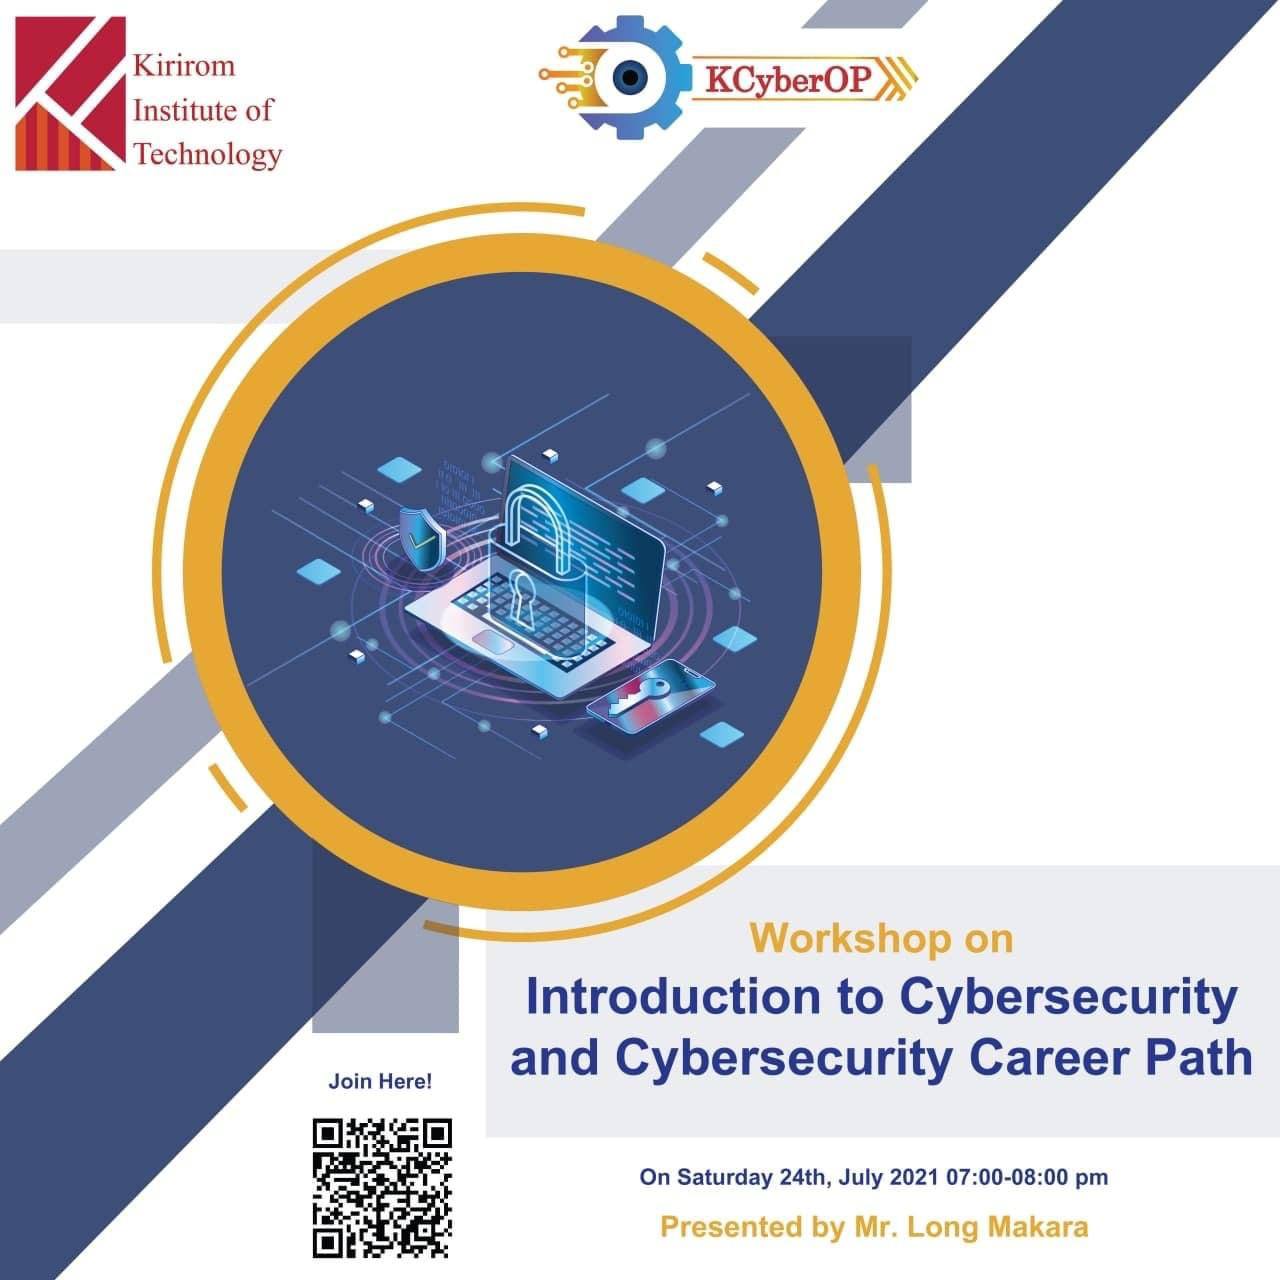 Introduction to Cybersecurity and Cyber Career